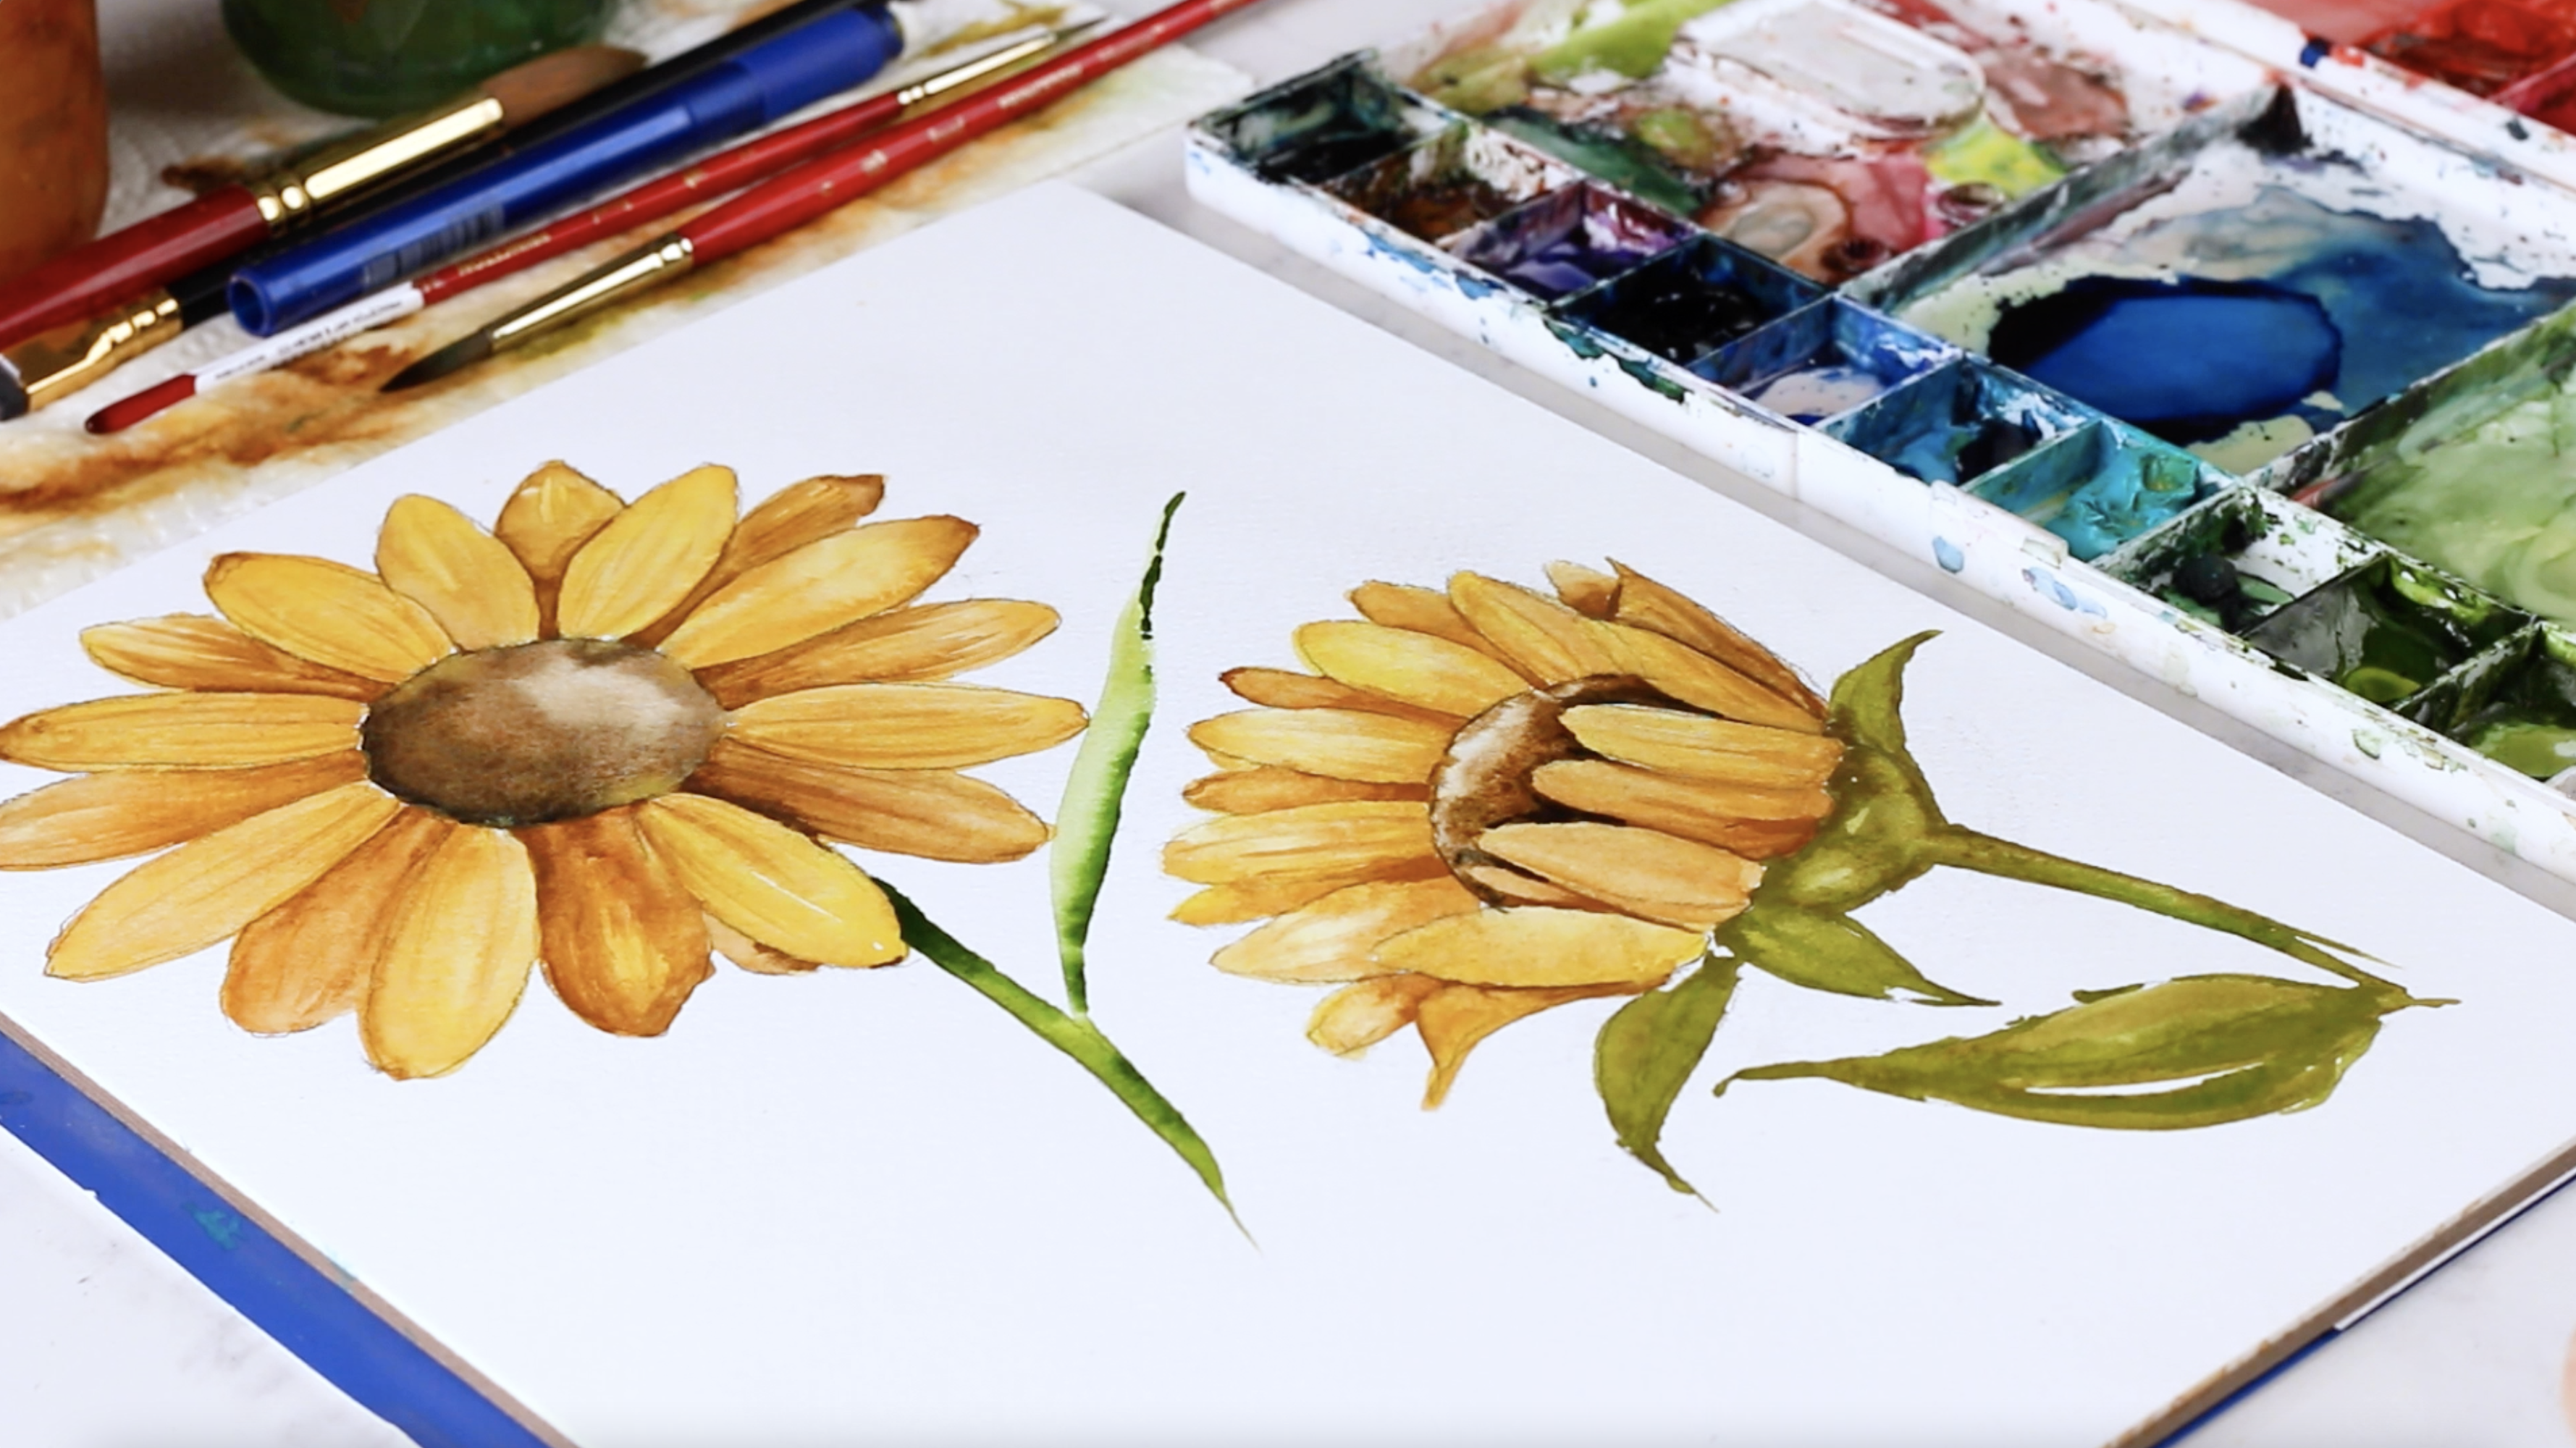 Watercolor for Beginners with Jenna Rainey 